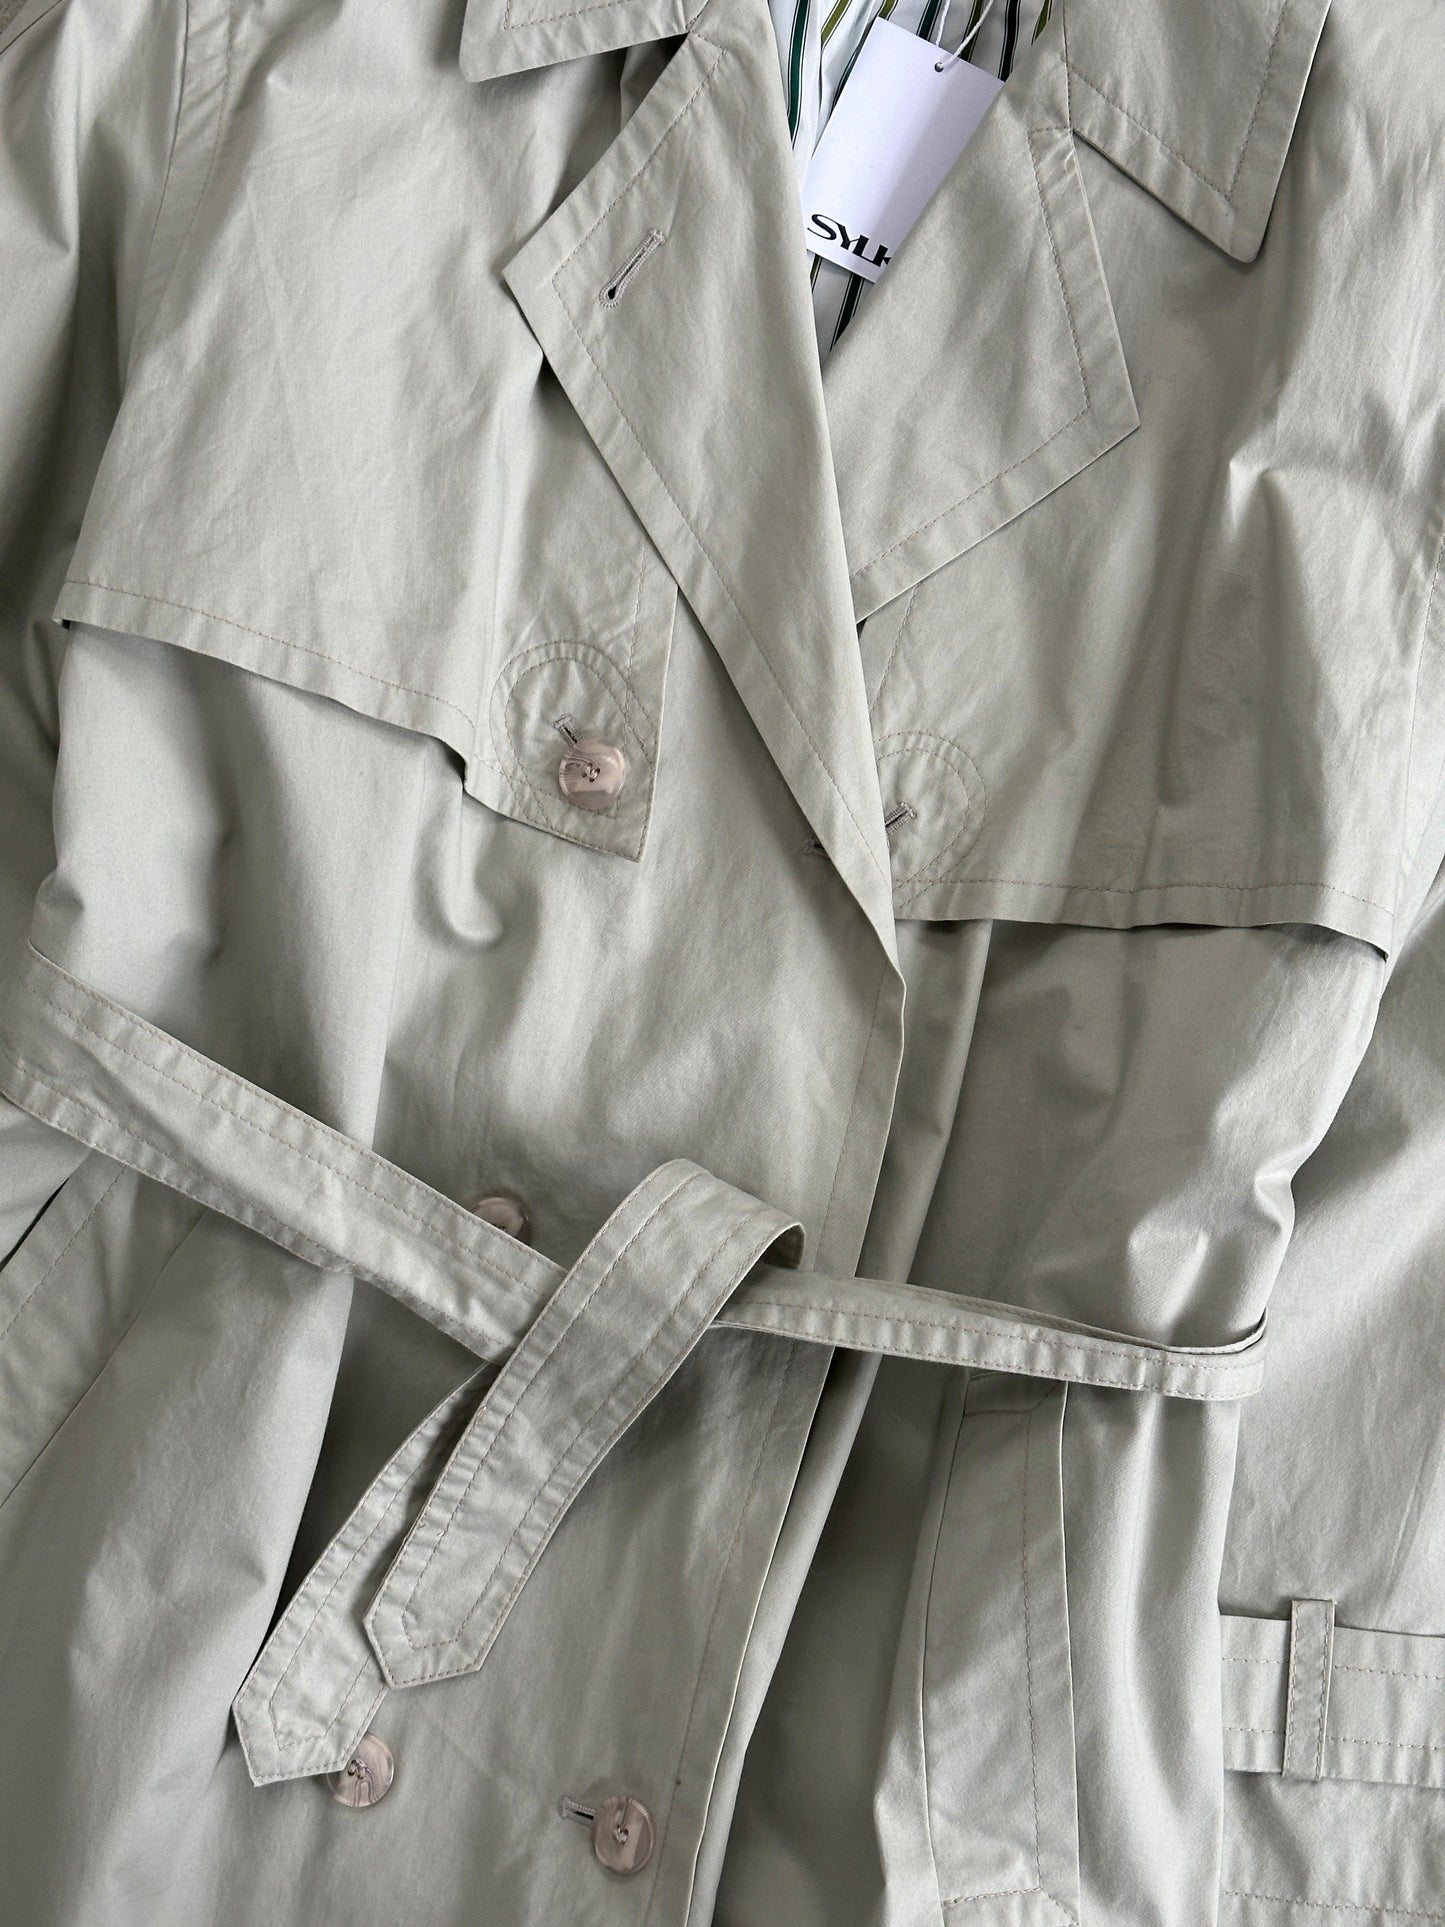 Vintage Shower Proof Belted Trench Coat - L - Known Source